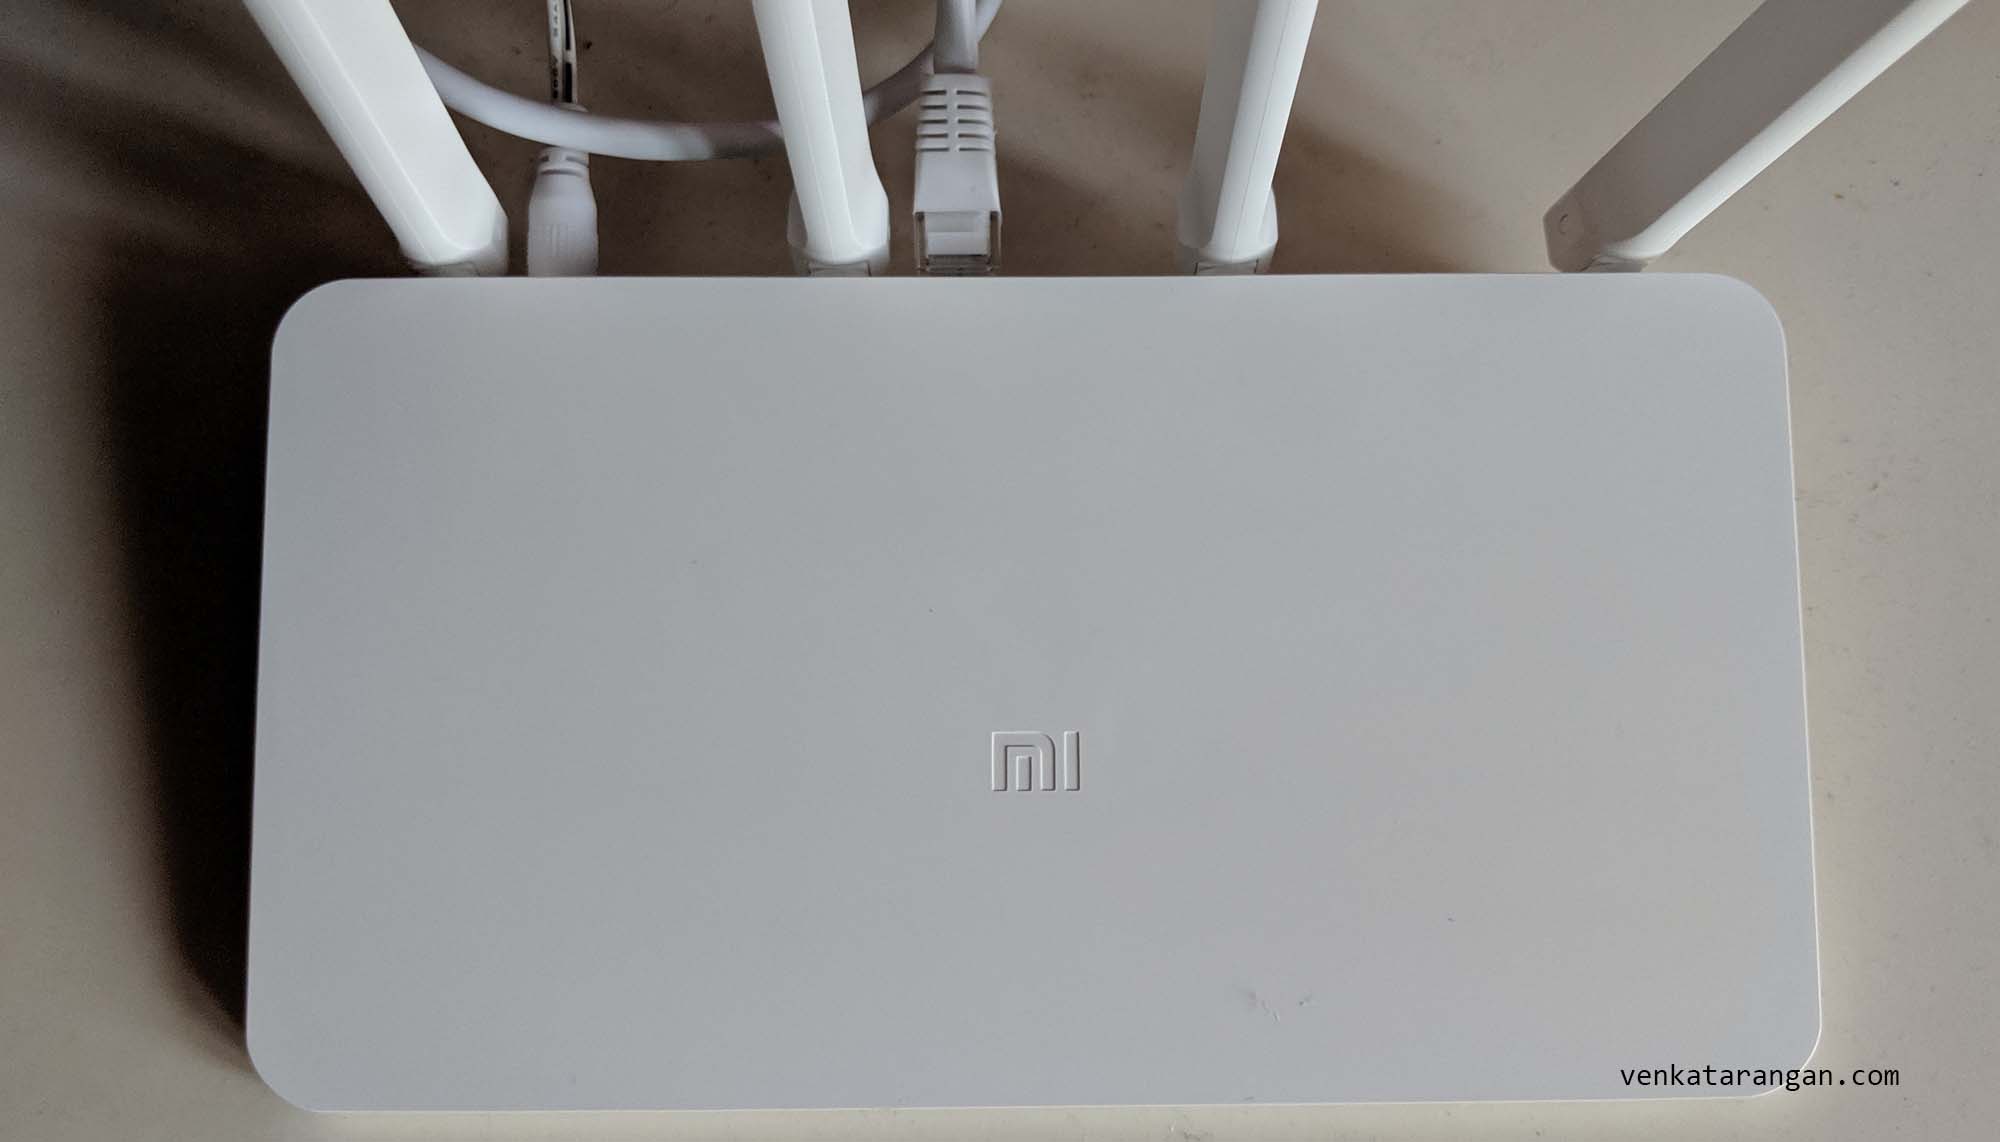 (Top view) Xiaomi Router 3C with four antennas in a single row